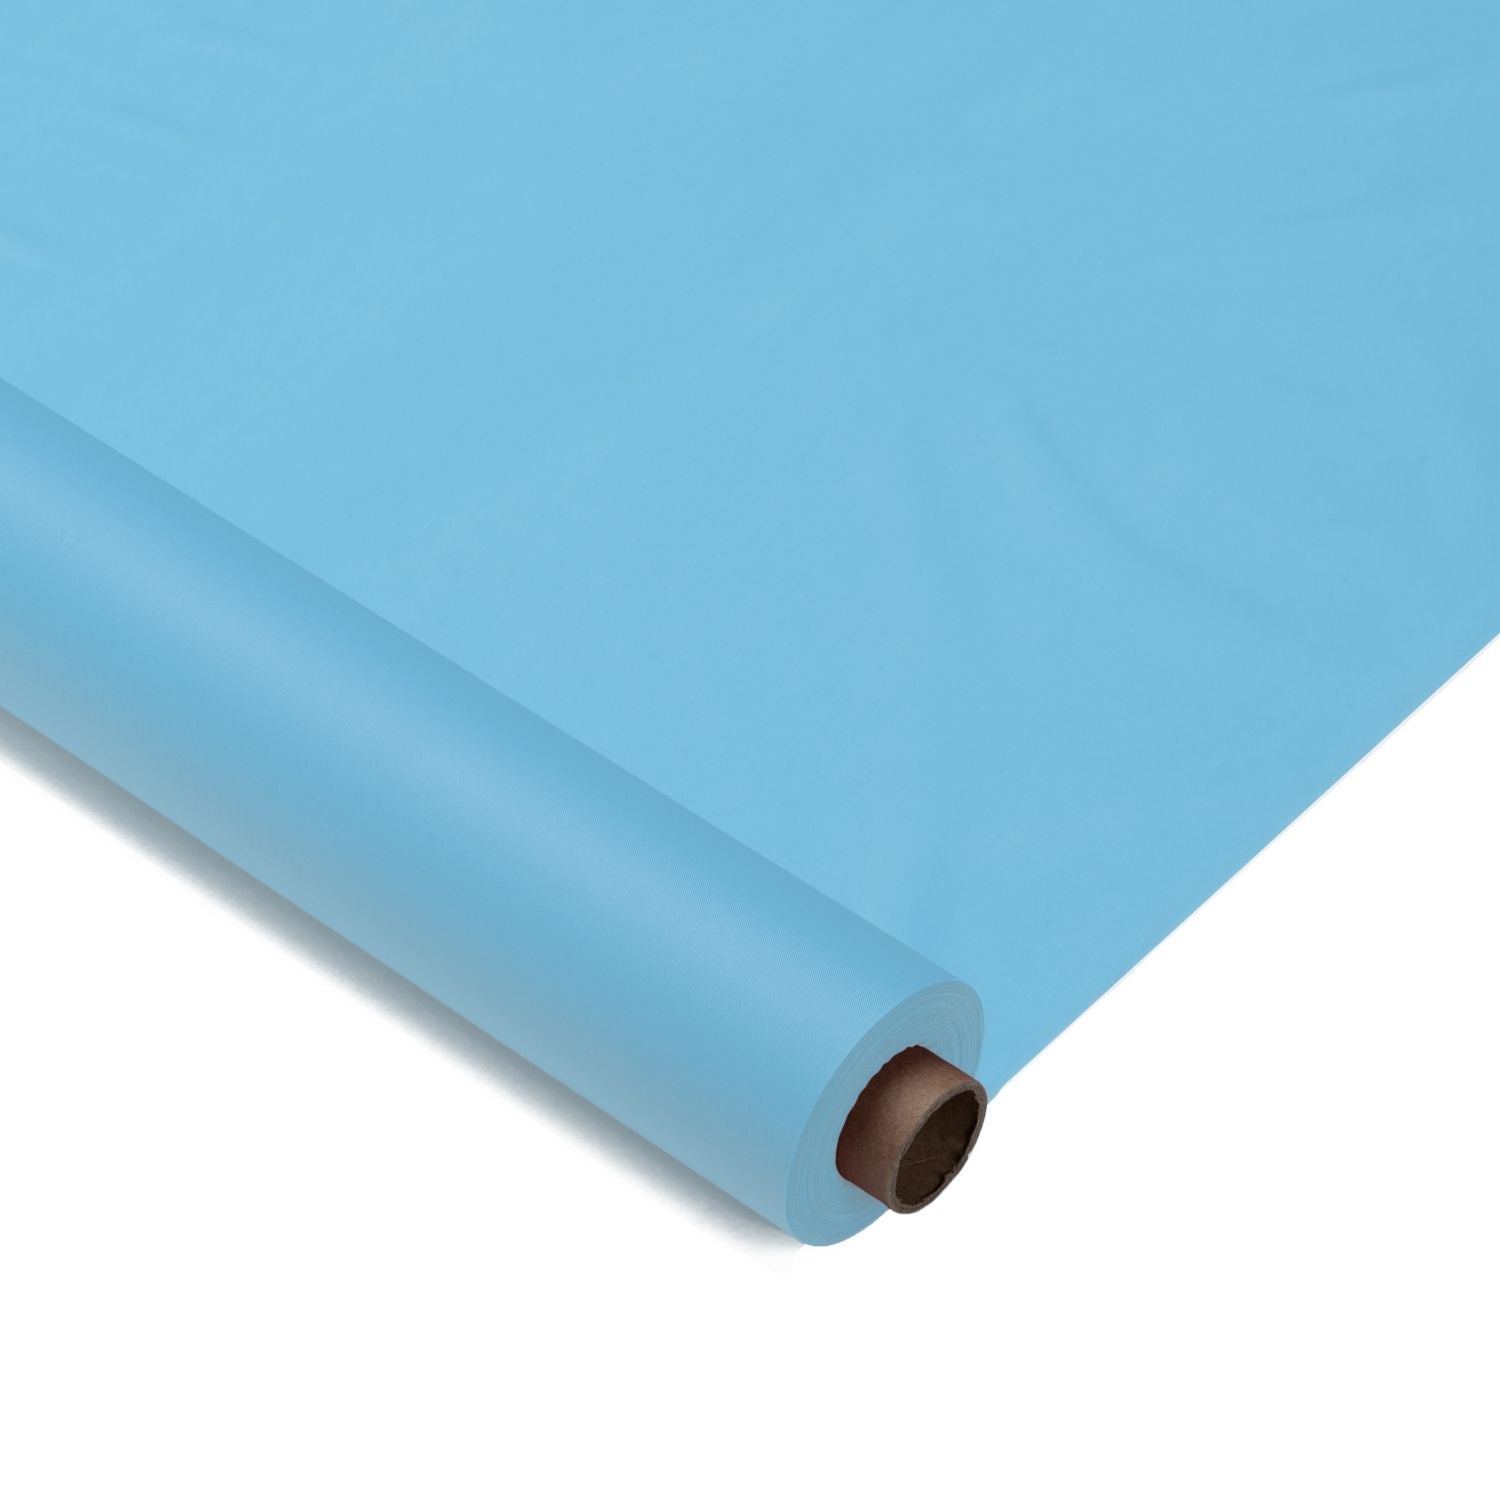 40 In. X 300 Ft. Premium Sky Blue Plastic Table Roll | 4 Pack